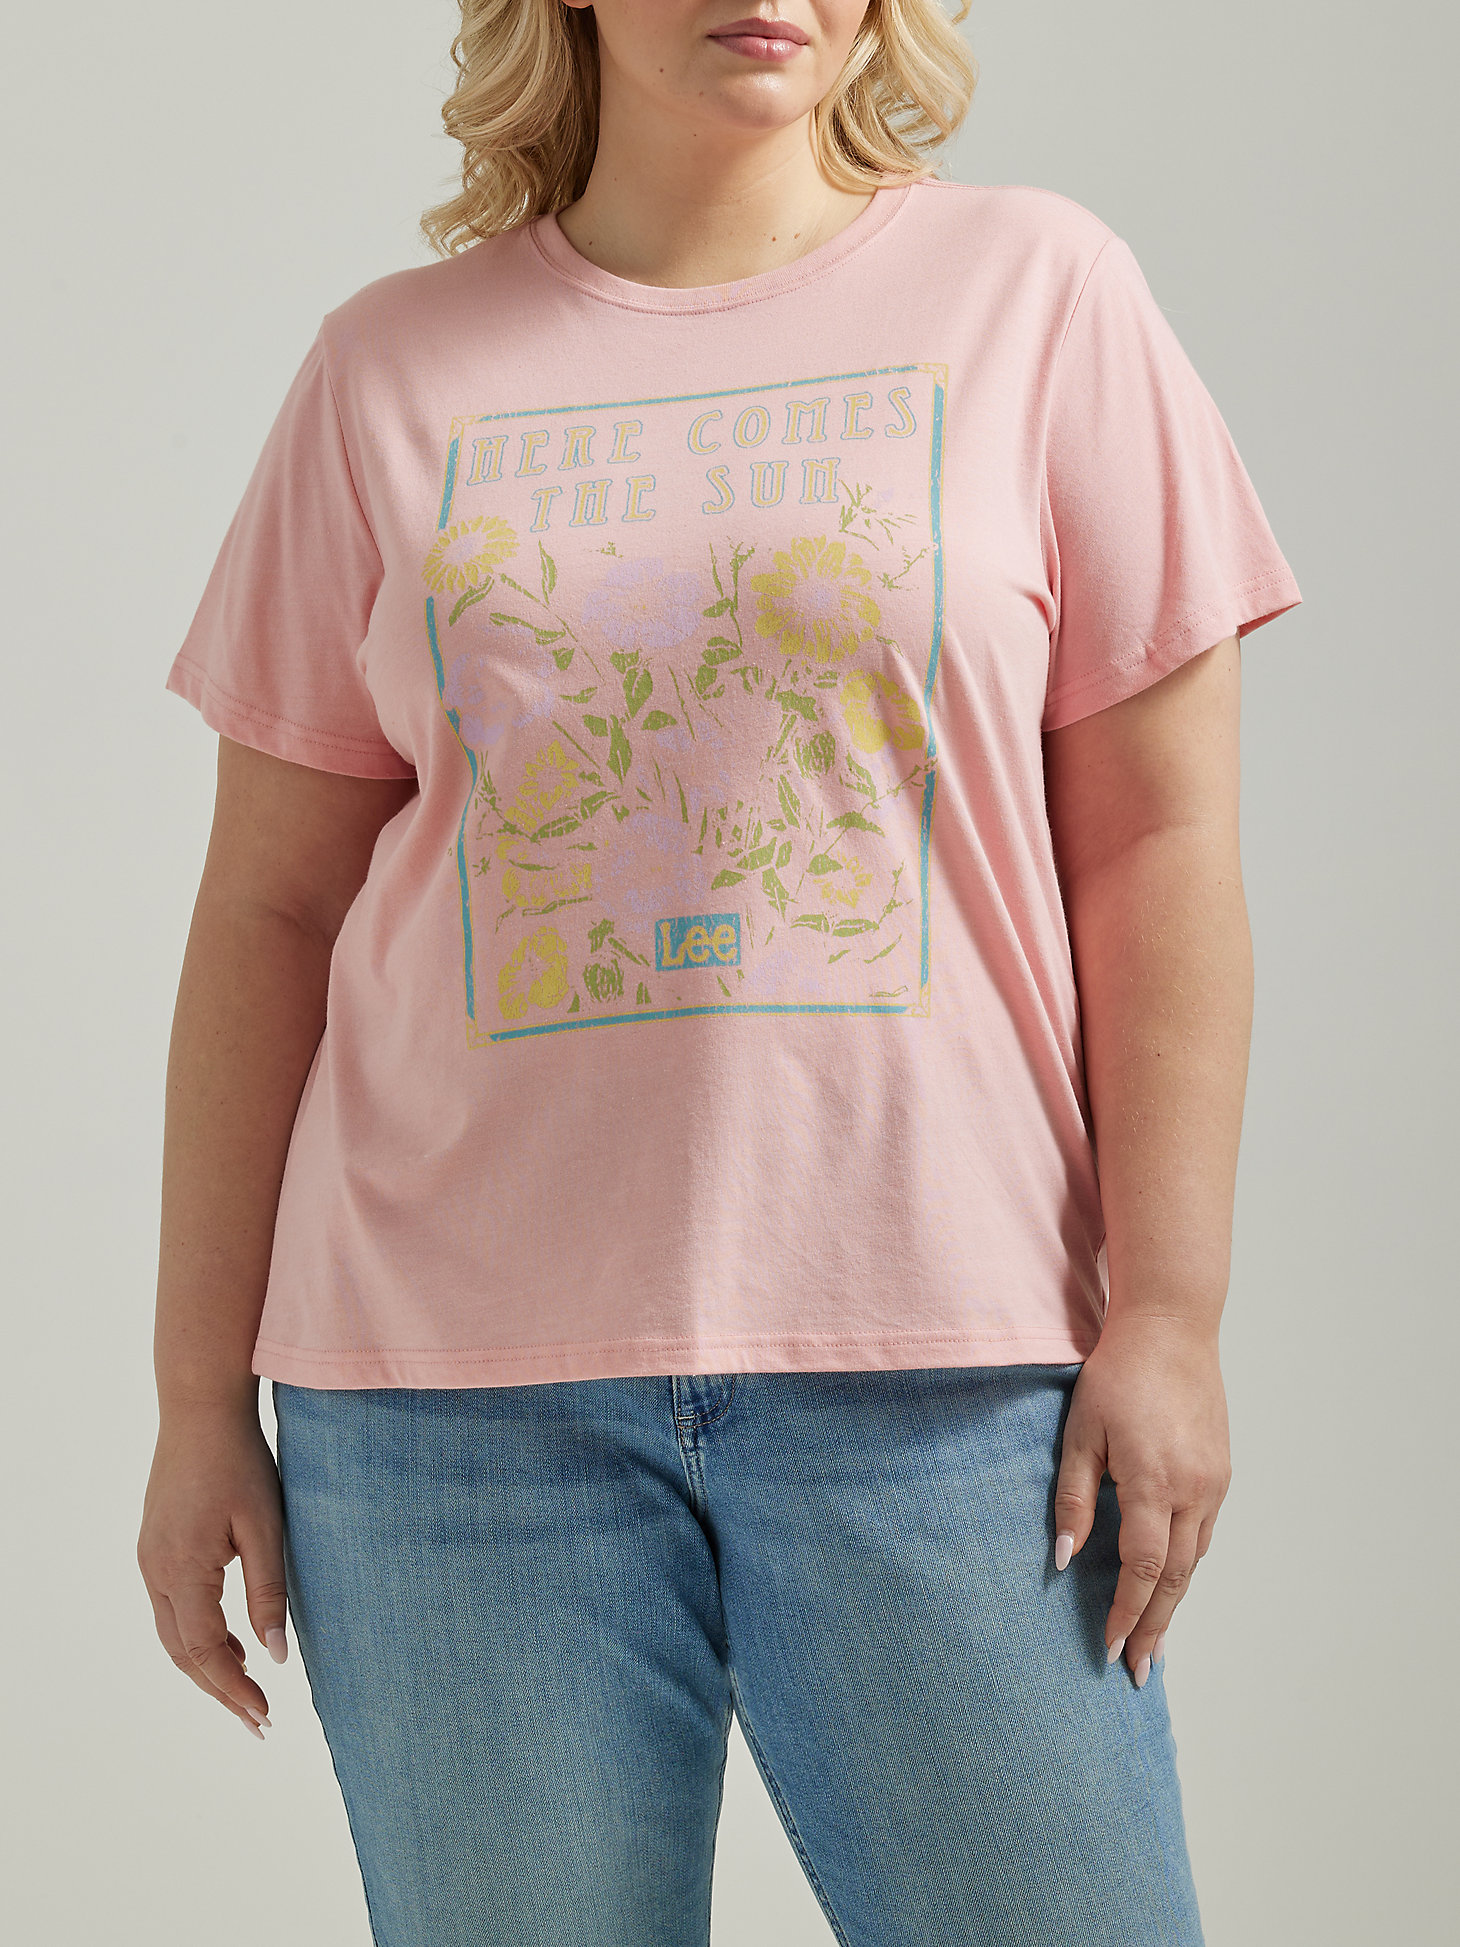 Women's Sun Flower Graphic Tee (Plus) in Pink Icing main view